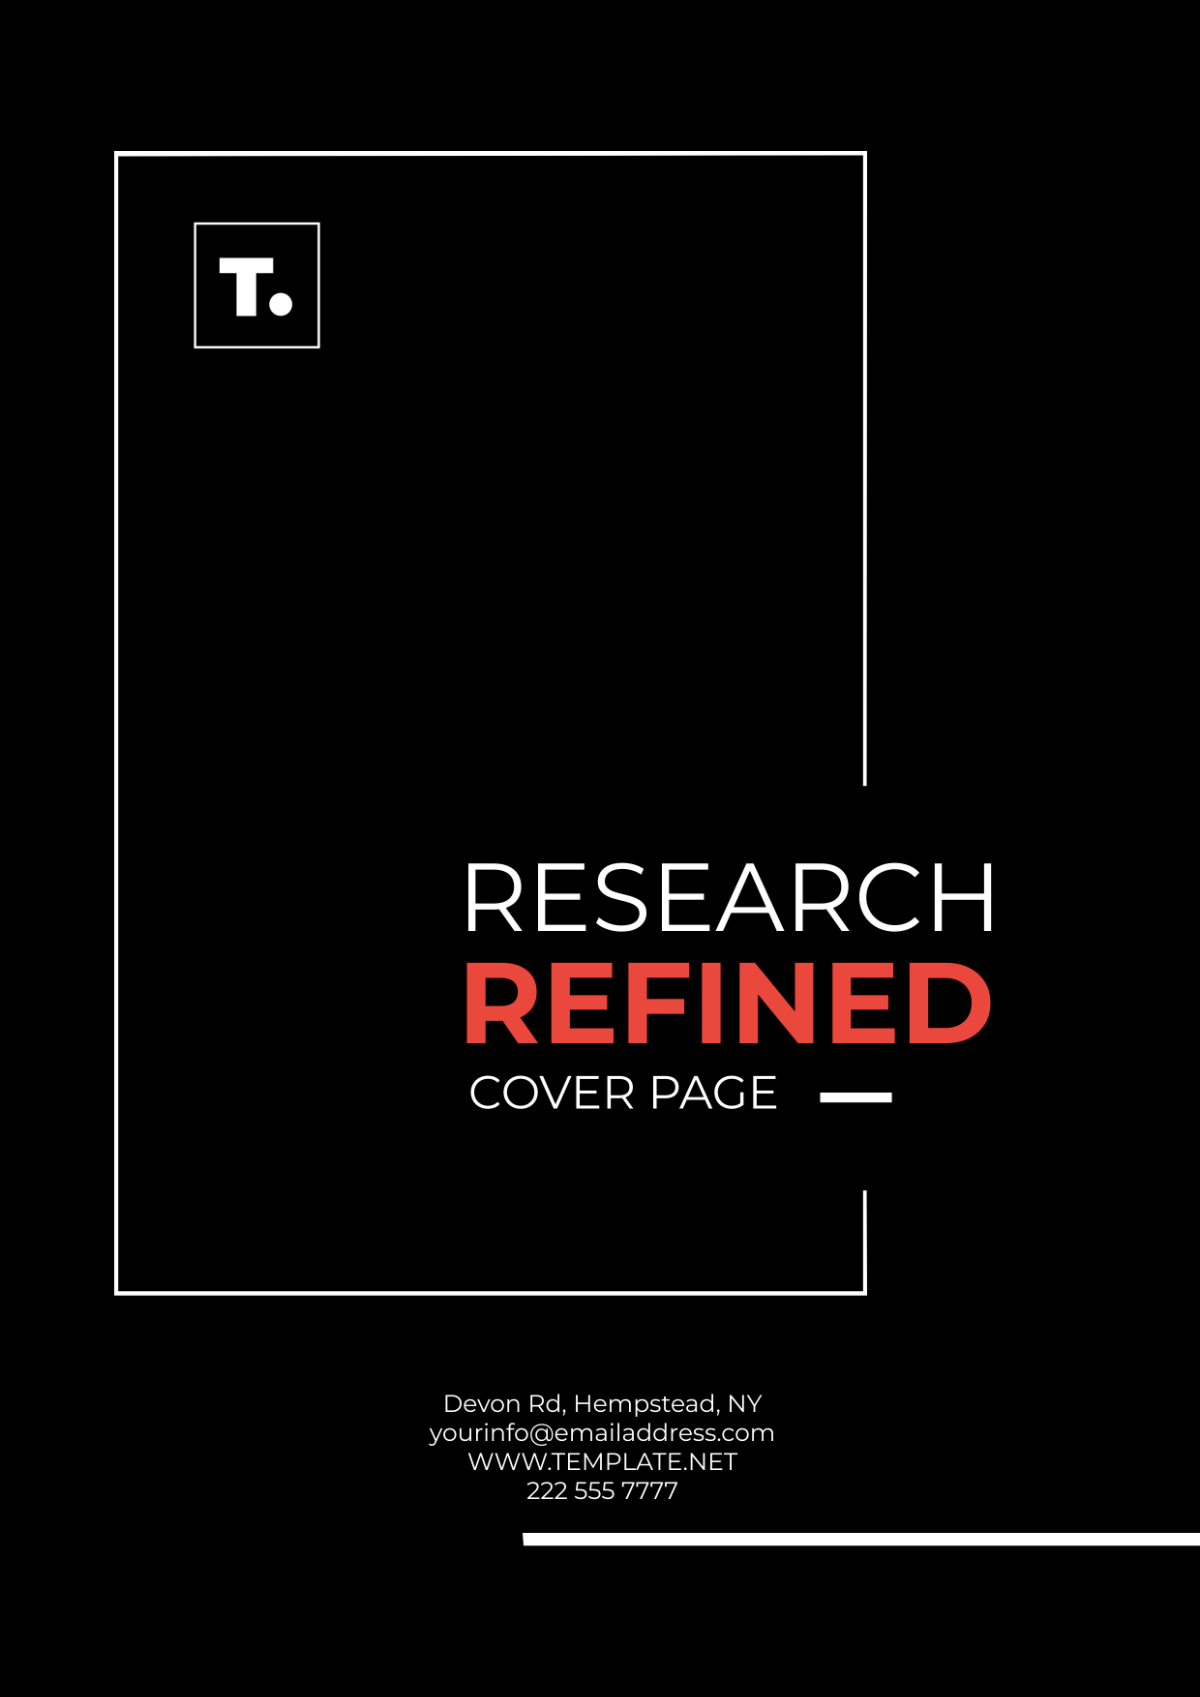 Research Refined Cover Page